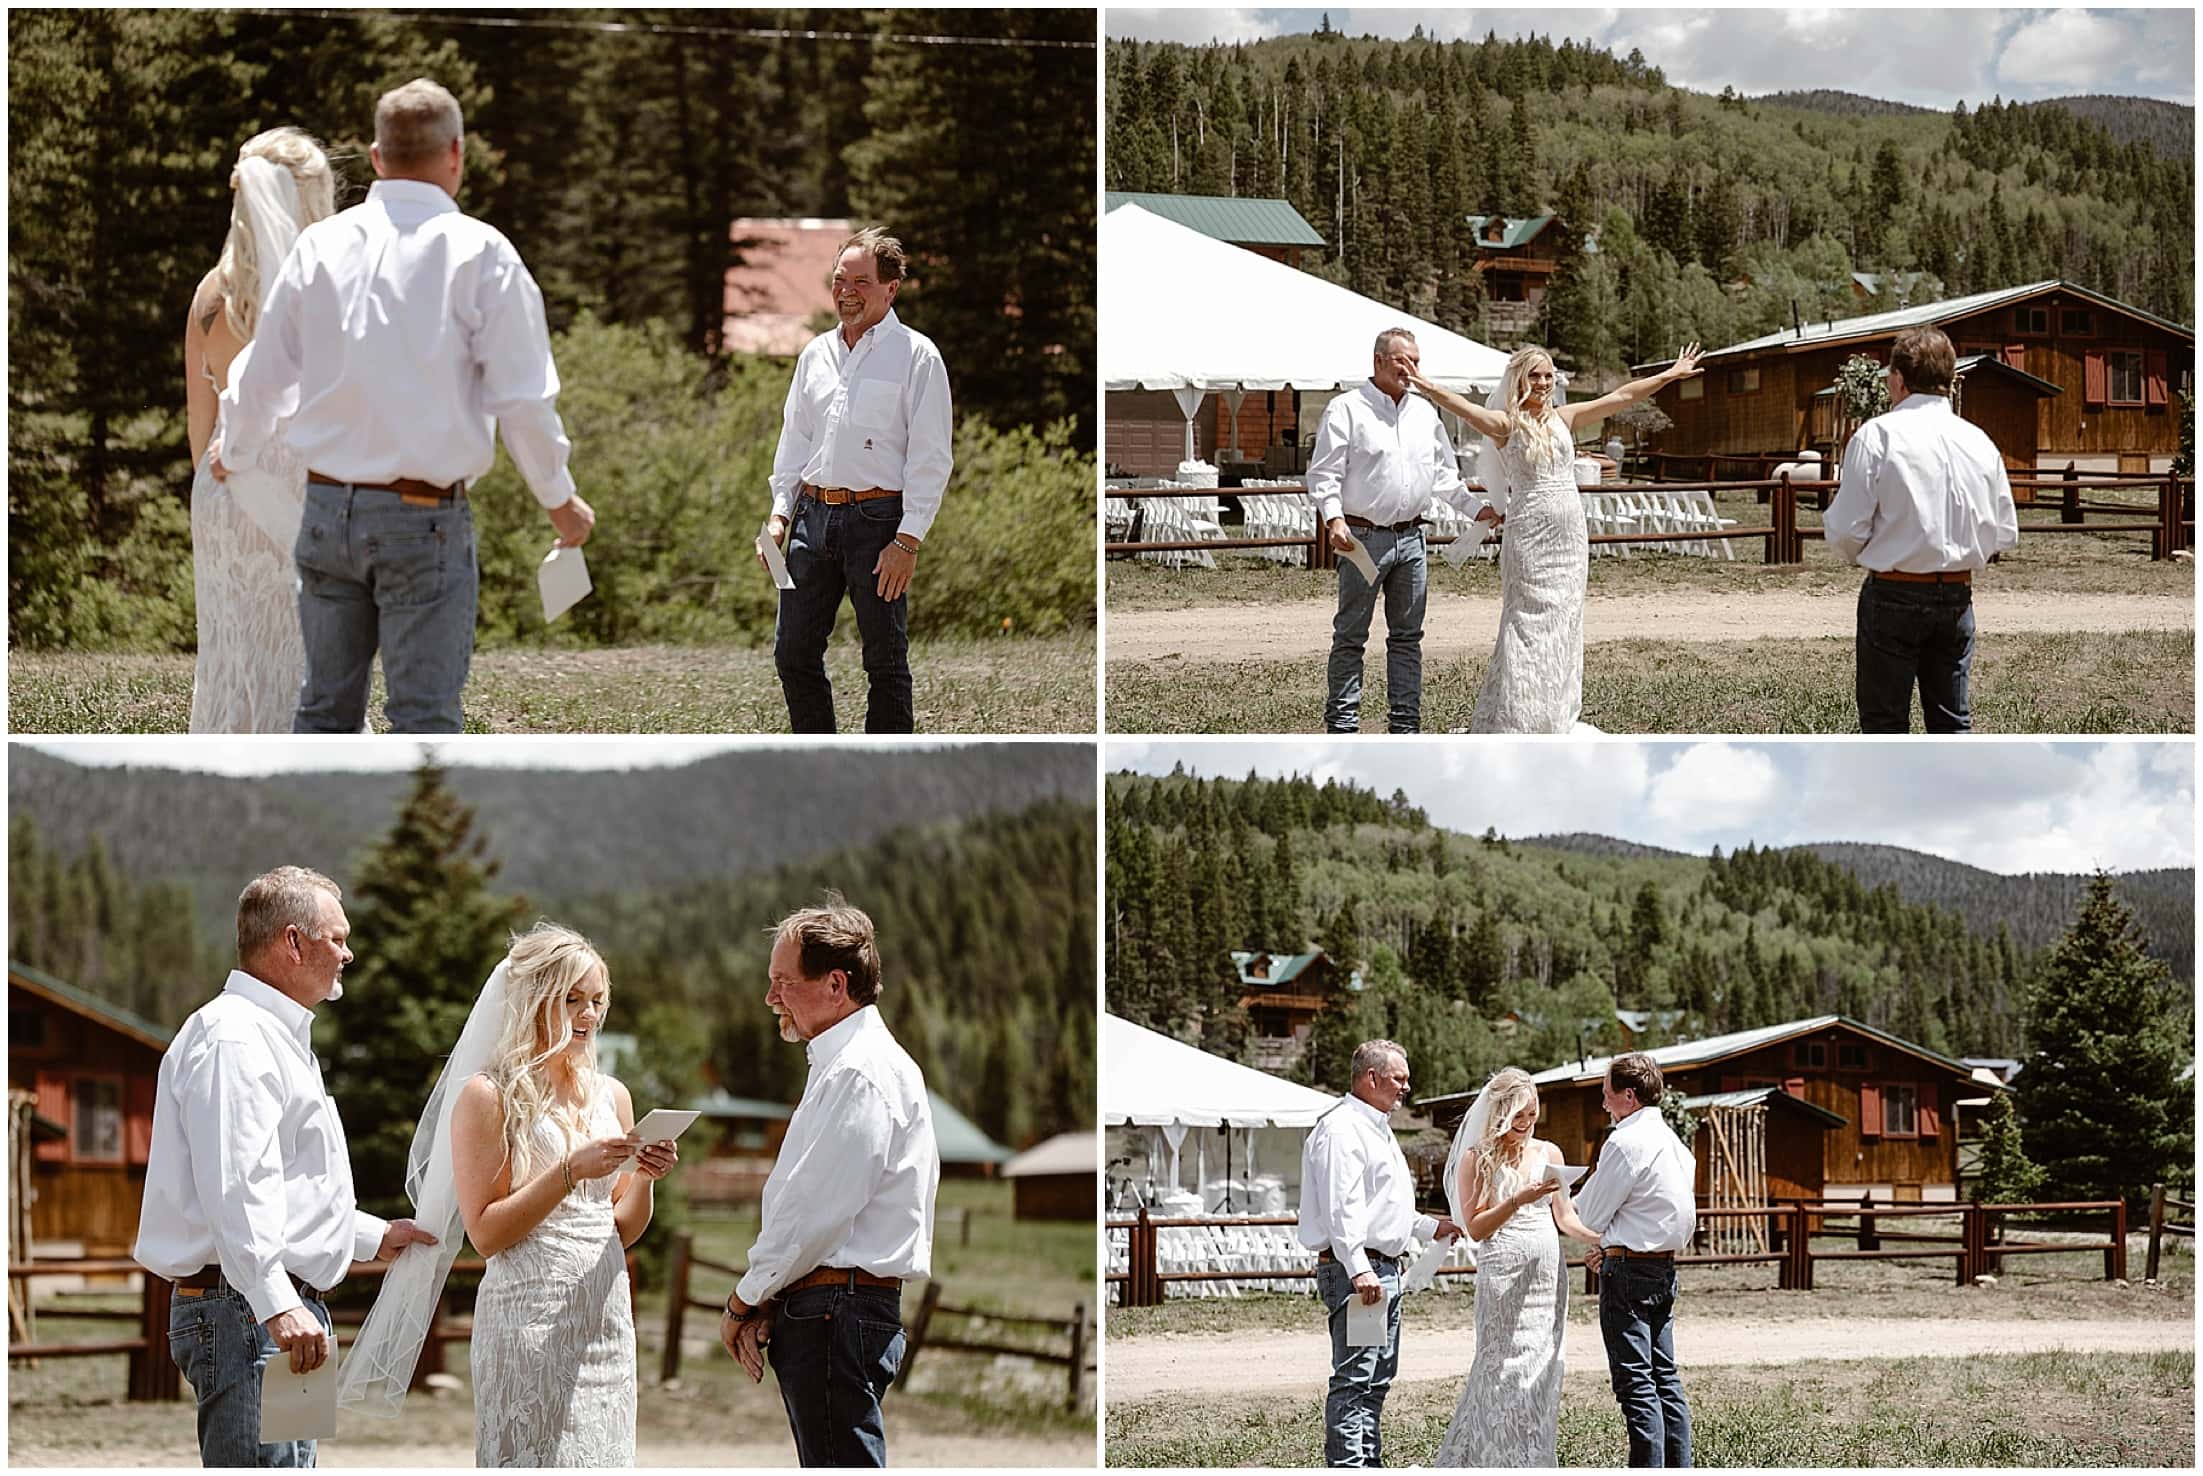 brides first look with dad in the mountains, emotional father of the bride, Aspen Lodge, Red River New Mexico, Red River New Mexico Wedding, Weddings in New Mexico, Destination mountain wedding, destination mountain elopement, elopements in new mexico, places to get married in new mexico, destination elopement photographer, mountain wedding photographer, new mexico wedding photographer, new mexico elopement photographer, brit nicole photography, cabin wedding, new mexico cabin wedding, mountain landscape for wedding, small intimate mountain wedding, small intimate river wedding, wedding photographer in new mexico, junebug weddings, the knot, wedding wire, 41 productions with lindsay gomez, dallas texas bride, DJ Allen Gallegos, Tao Cakes, New Mexico Wedding planner karen kelly, barnes jewelry, Lillian West bridal dress, Lang’s Bridal, enchanted florist wedding flowers, places to get married in texas, texas wedding photographer, texas elopement photographer, forest wedding, forest elopement, wooded area for wedding, wooded elopement, elopement in the woods, amarillo wedding photographer, amarillo elopement photographer